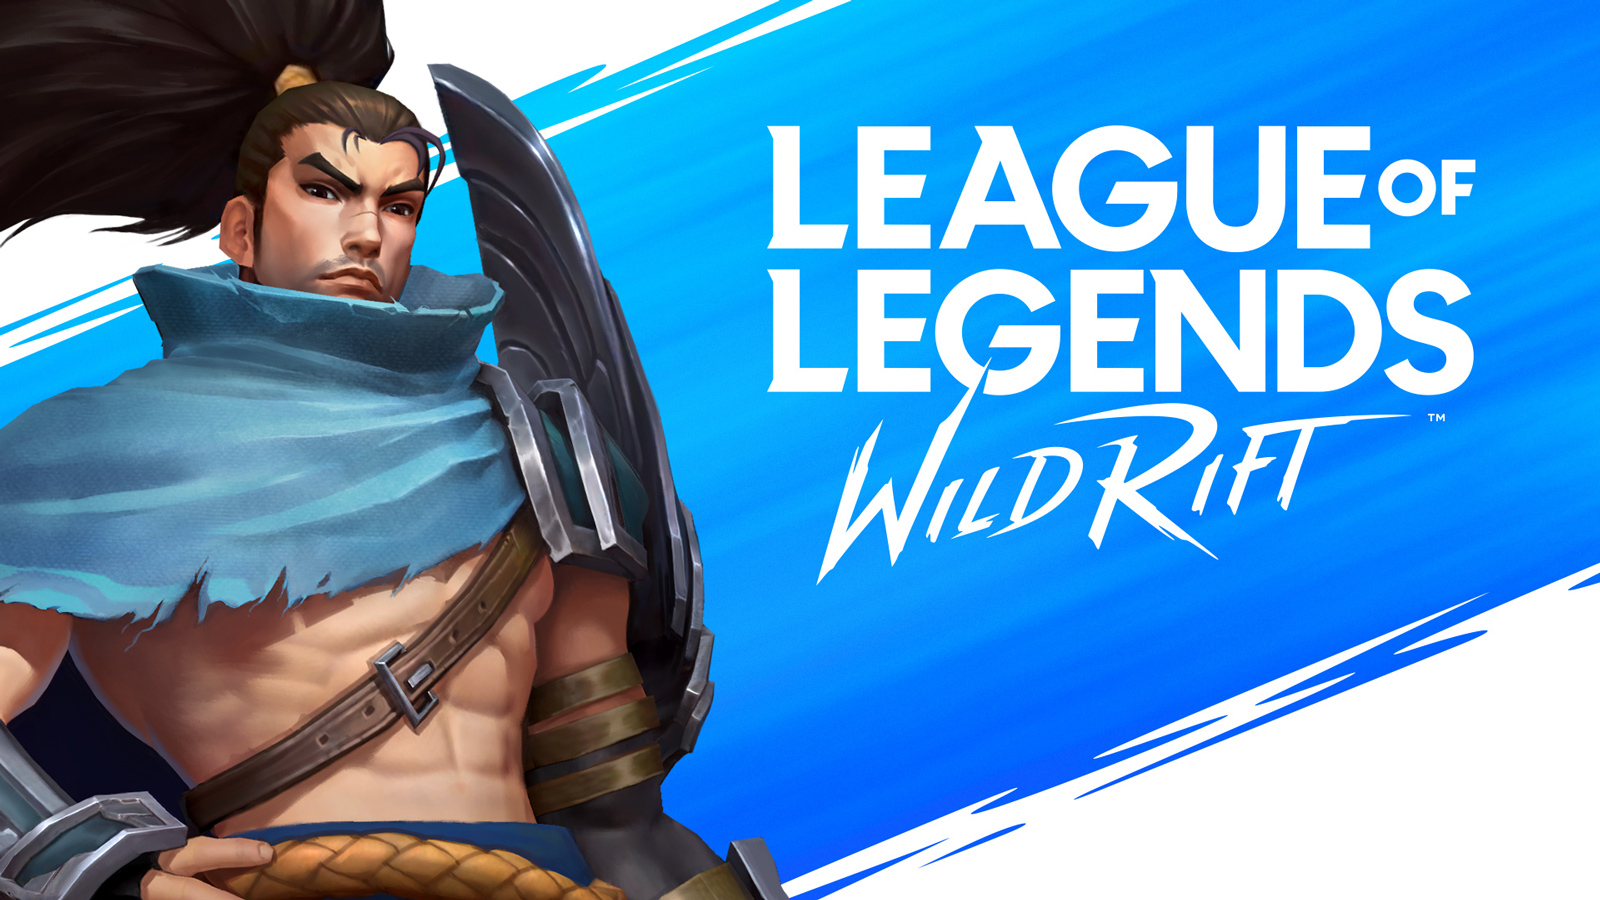 Here Are The Minimum System Requirements To Play League Of Legends: Wild Rift On Mobile Devices